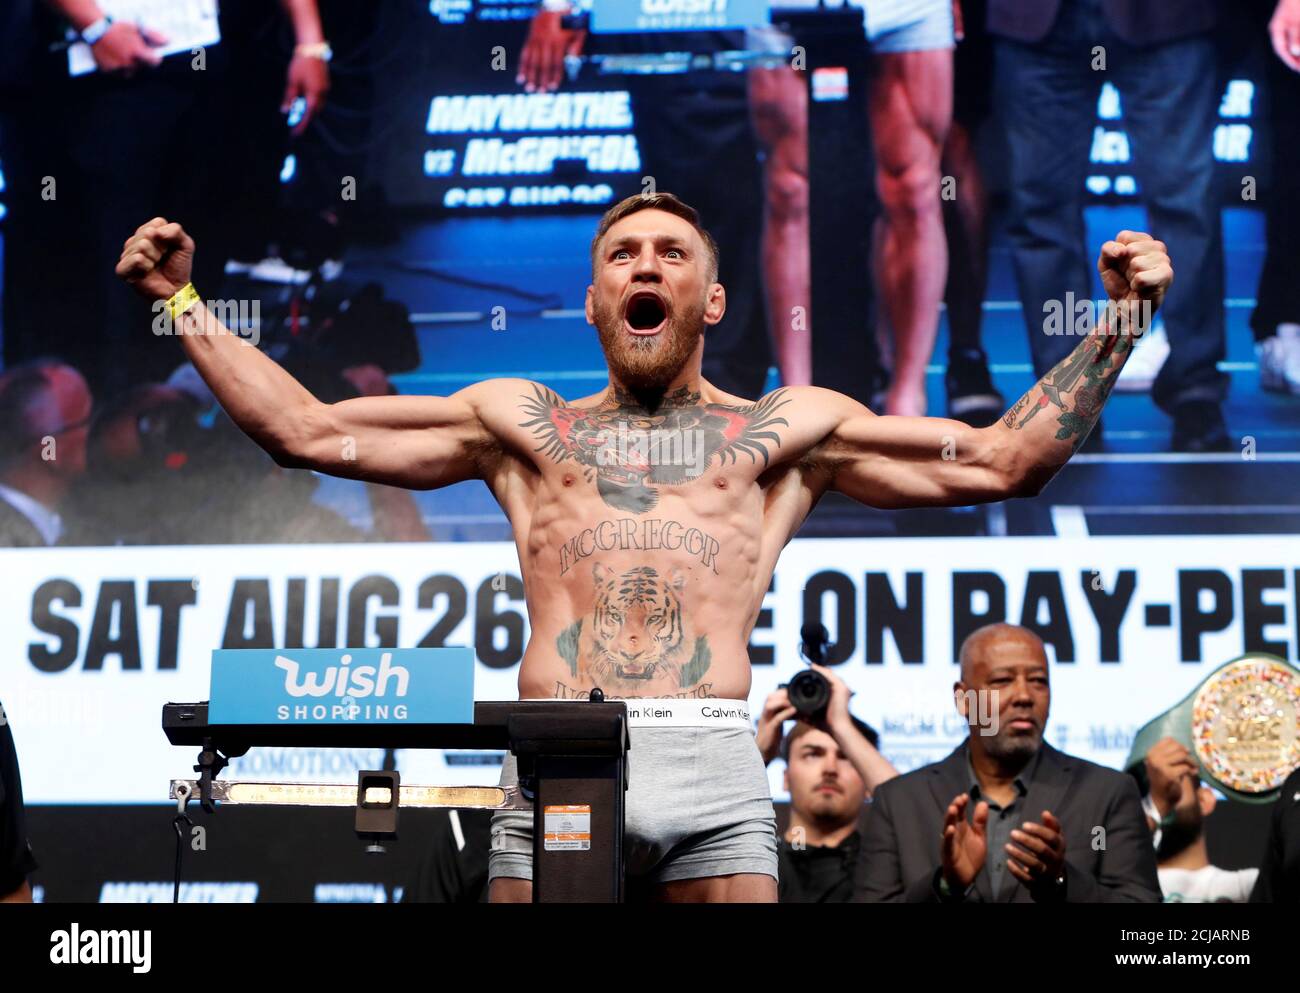 UFC lightweight champion Conor McGregor of Ireland poses on the scale  during his official weigh-in at T-Mobile Arena in Las Vegas, Nevada, U.S.  on August 25, 2017. REUTERS/Steve Marcus Stock Photo -